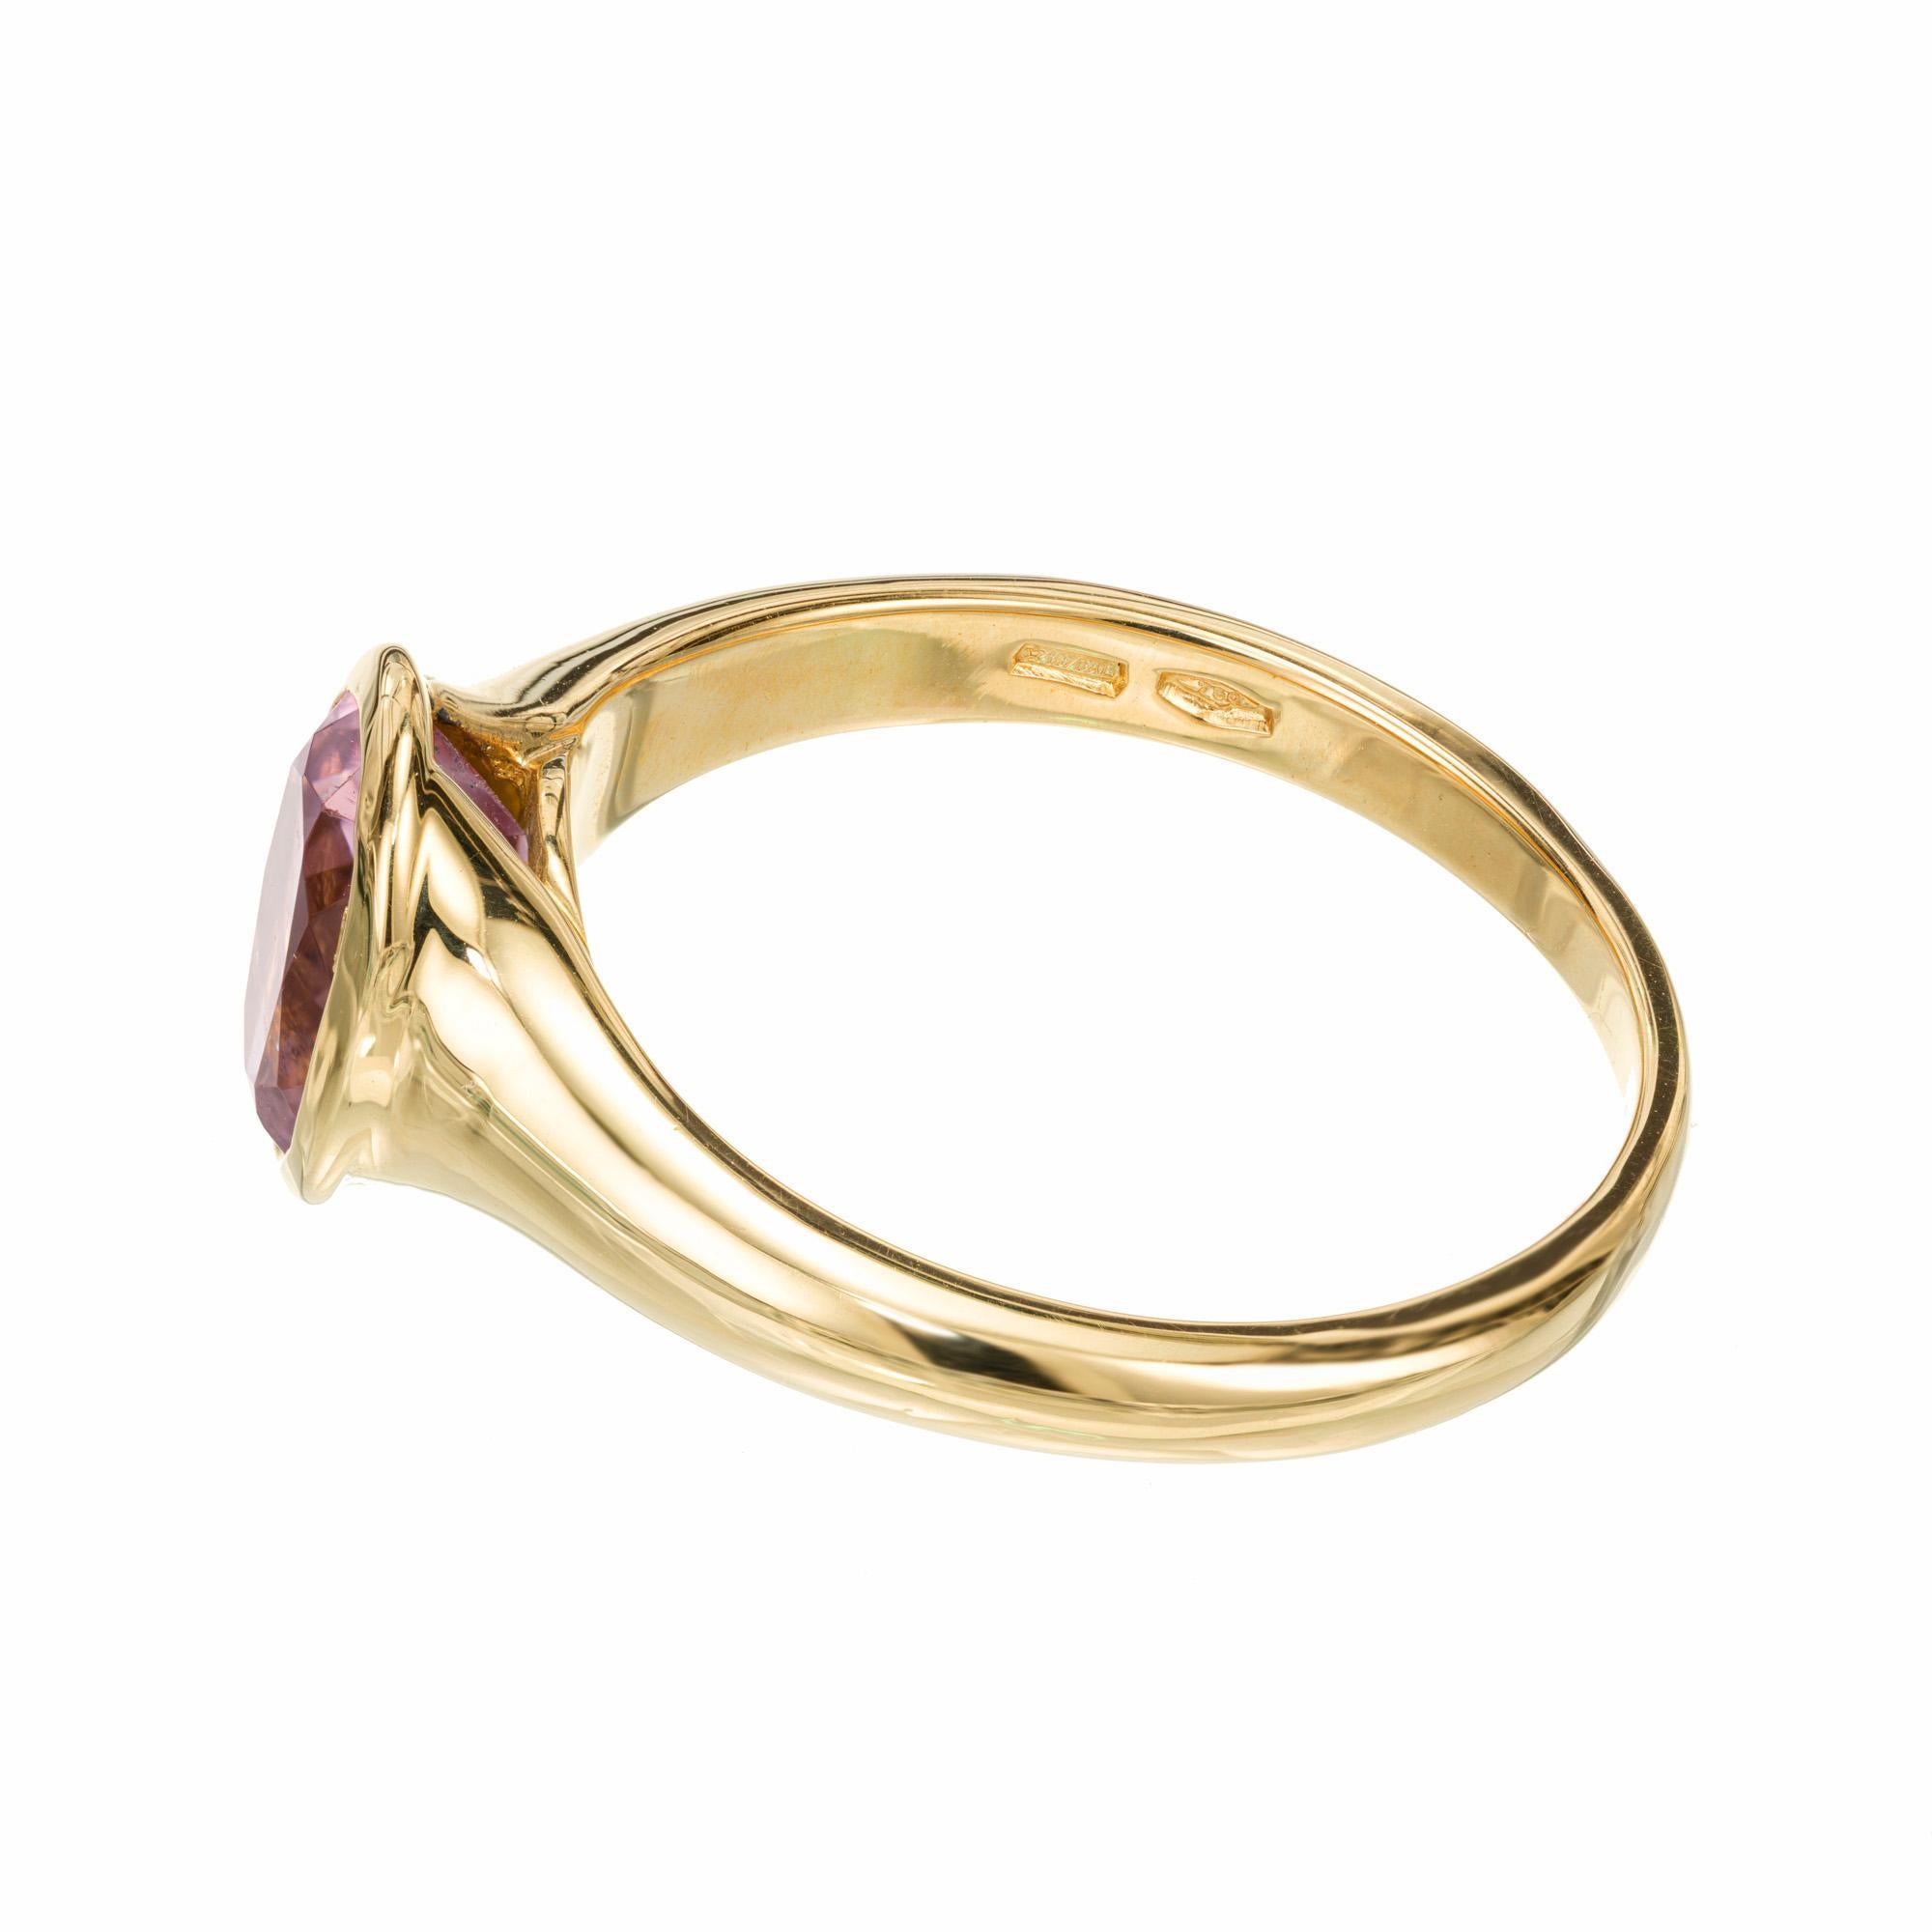 Bvlgari 1.68 Carat Tourmaline Yellow Gold Ring In Good Condition For Sale In Stamford, CT